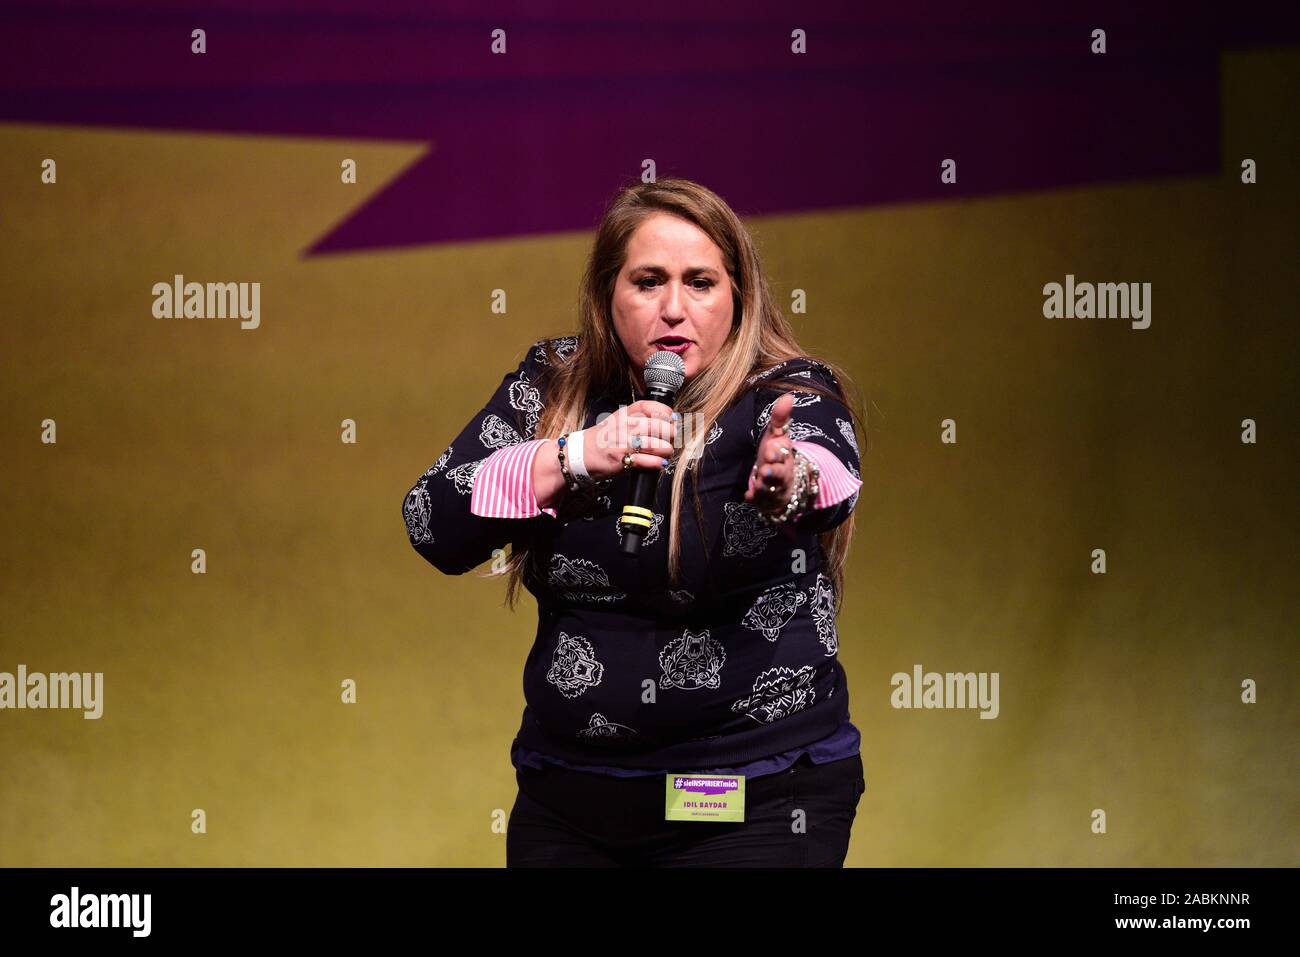 The comedy artist Idil Baydar speaks at the cultural festival '#sieINSPIRIERTmich' on International Women's Day and on the occasion of the 100th anniversary of women's suffrage in Munich's Muffathalle. [automated translation] Stock Photo